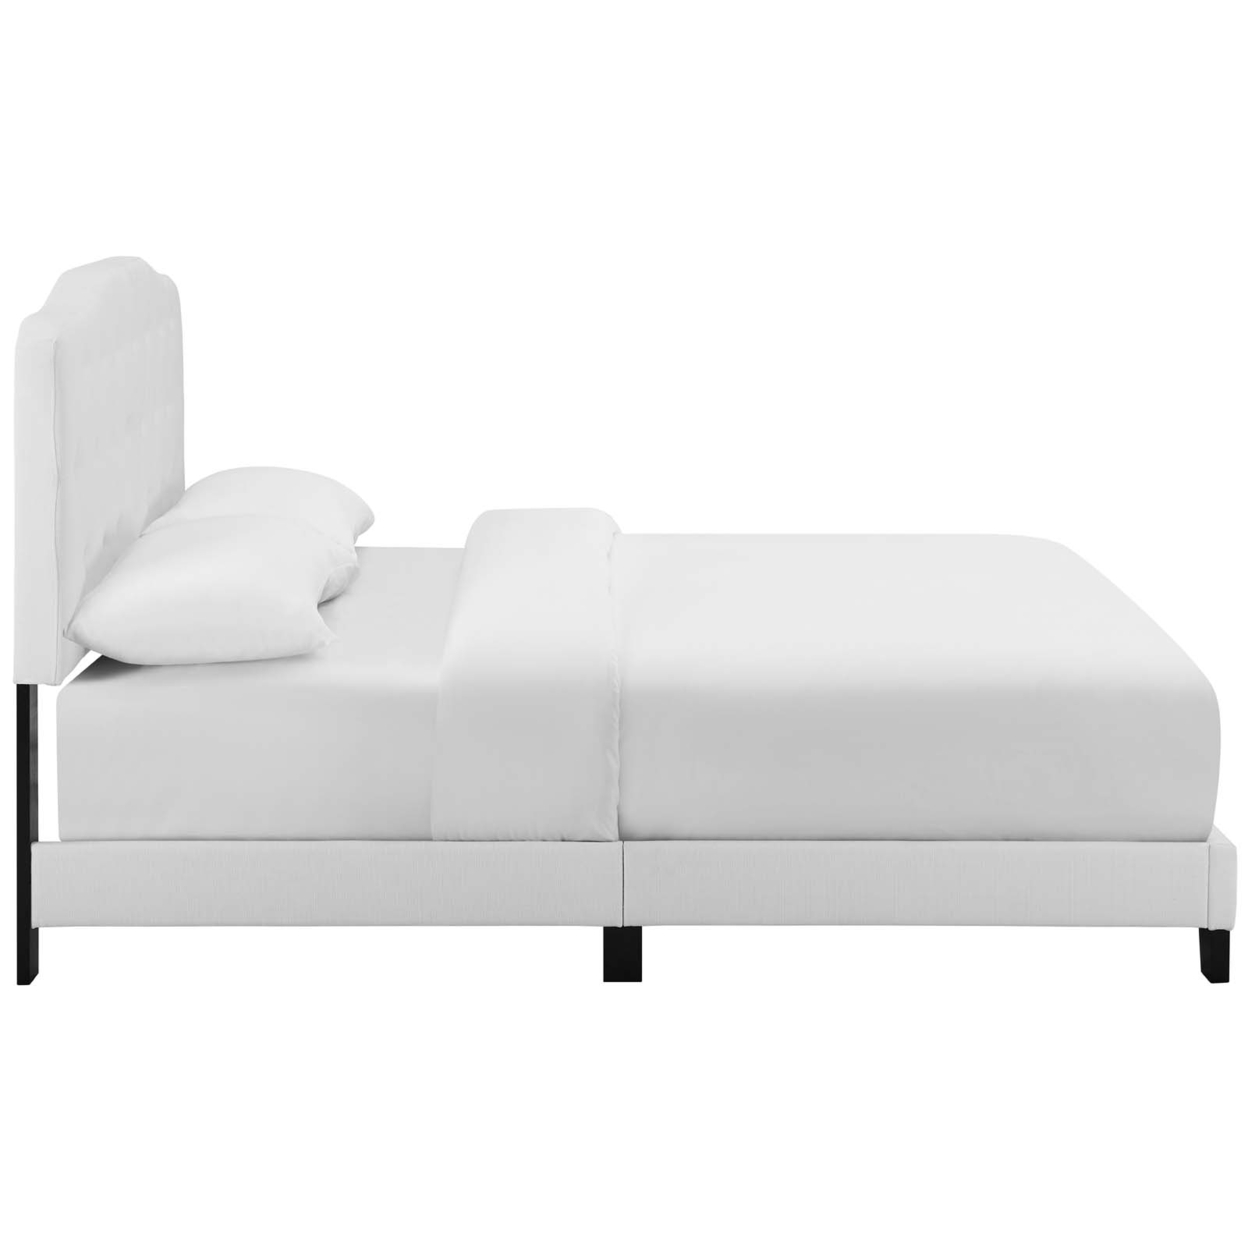 Amelia King Upholstered Fabric Bed, White